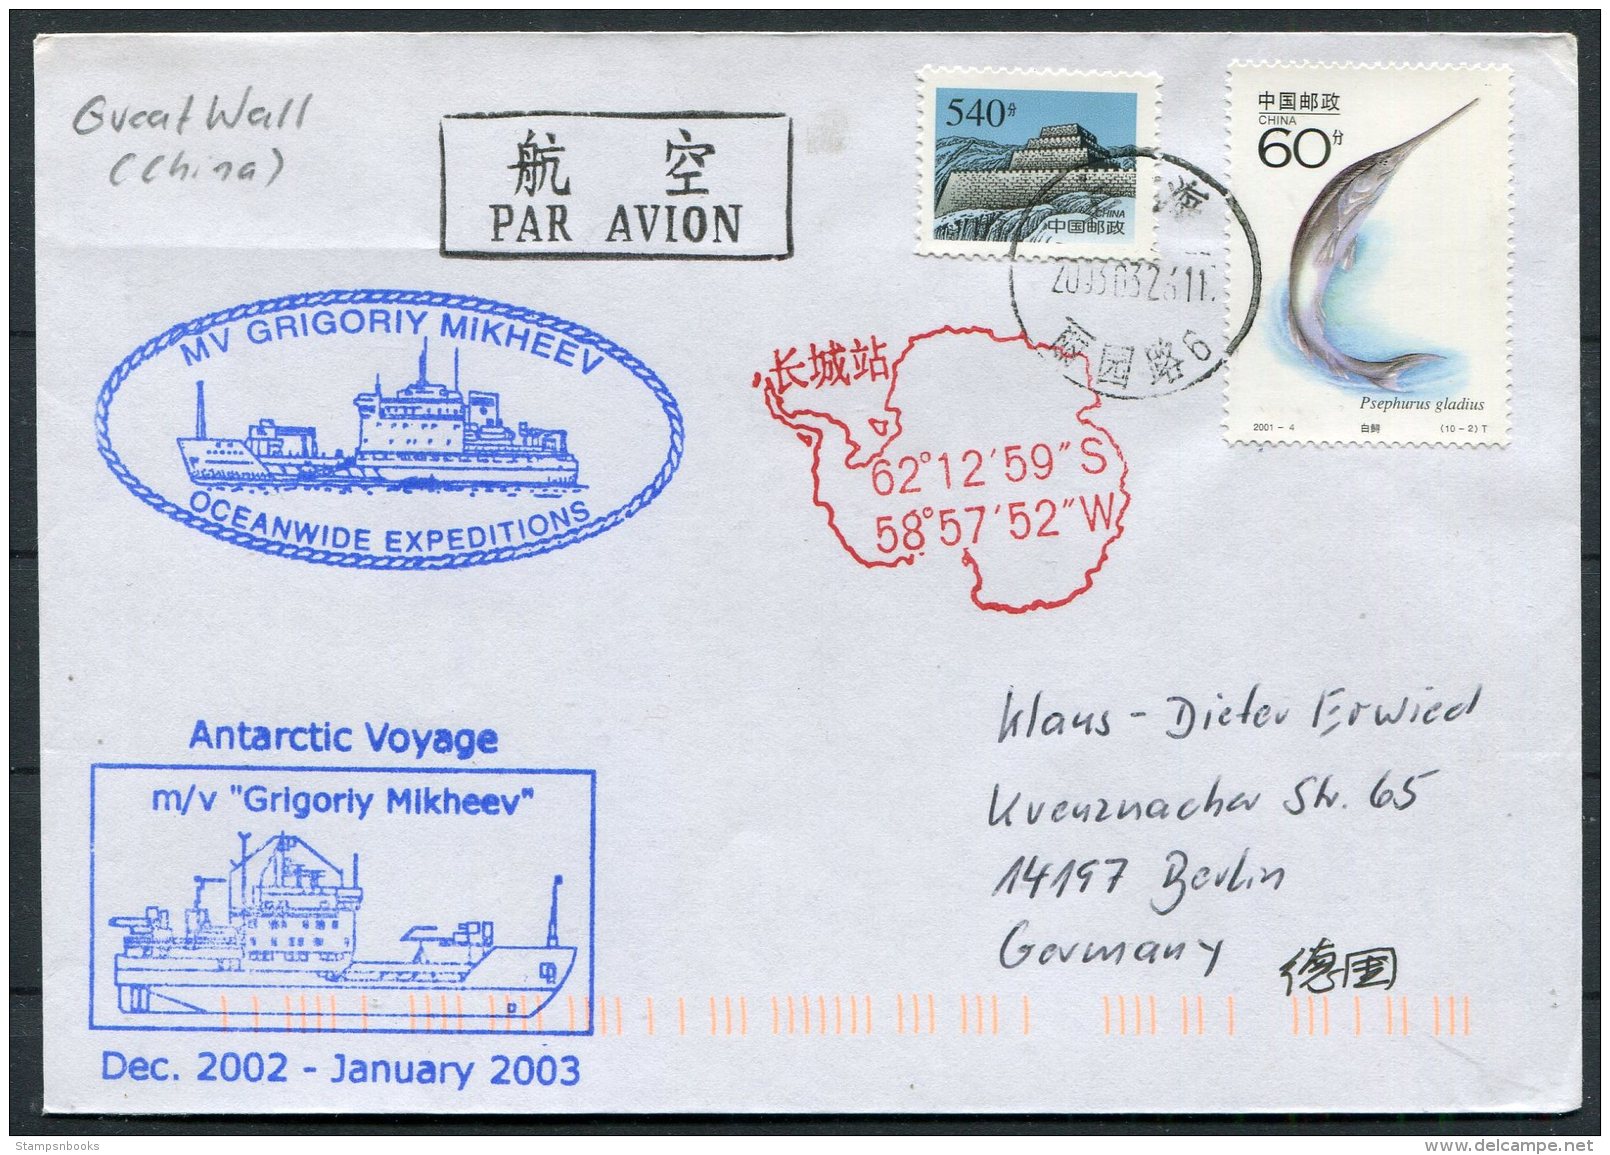 2003 China Antarctica Antarctic Voyage M/V GRIGORIY MIKHEEV Russia Ship Polar Expedition Cover - Covers & Documents